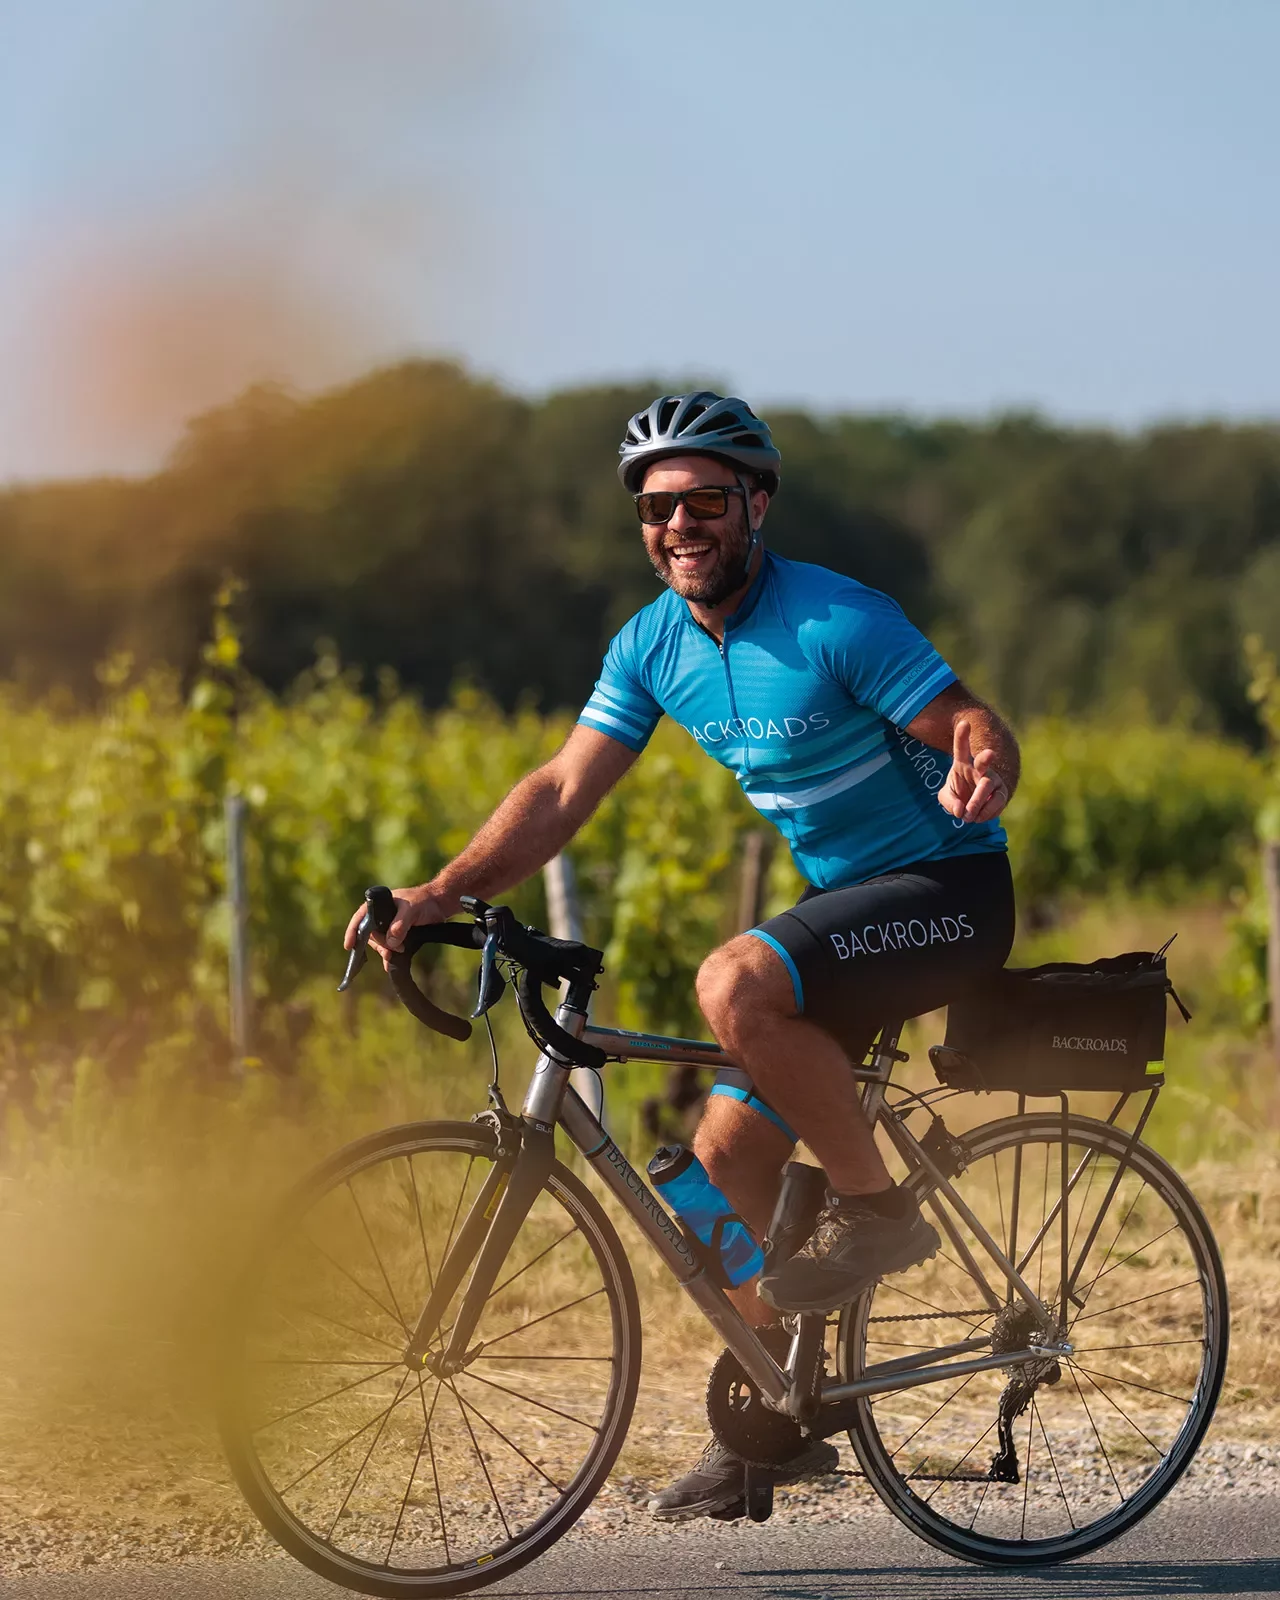 Guest cycling past grapevines, showing peace sign to camera.